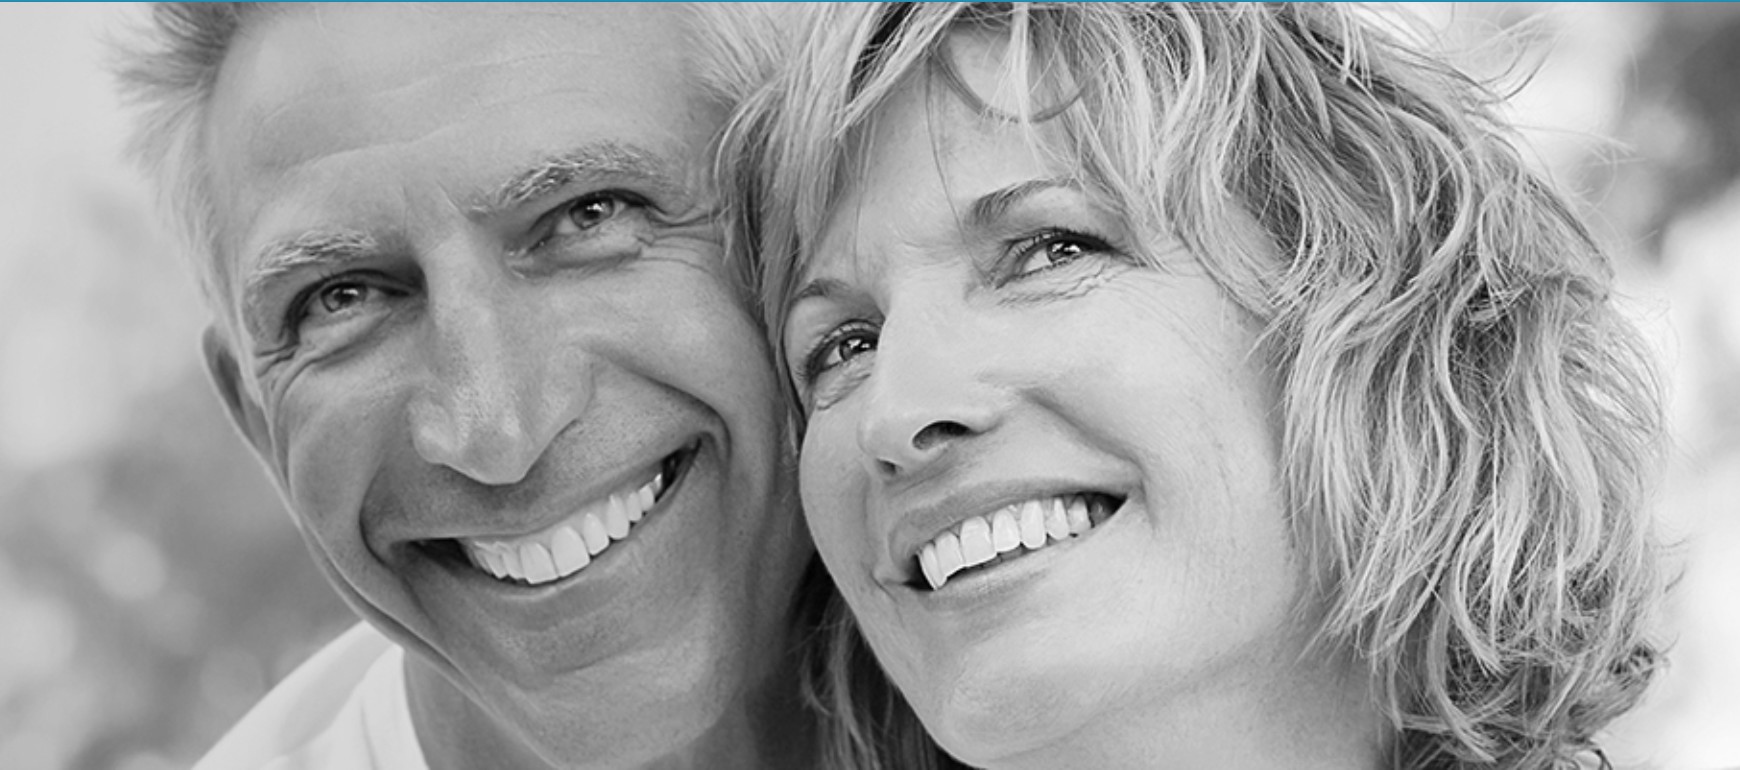 Same Day Dental Implants Treatments Montreal and Ottawa - The Smile Doc